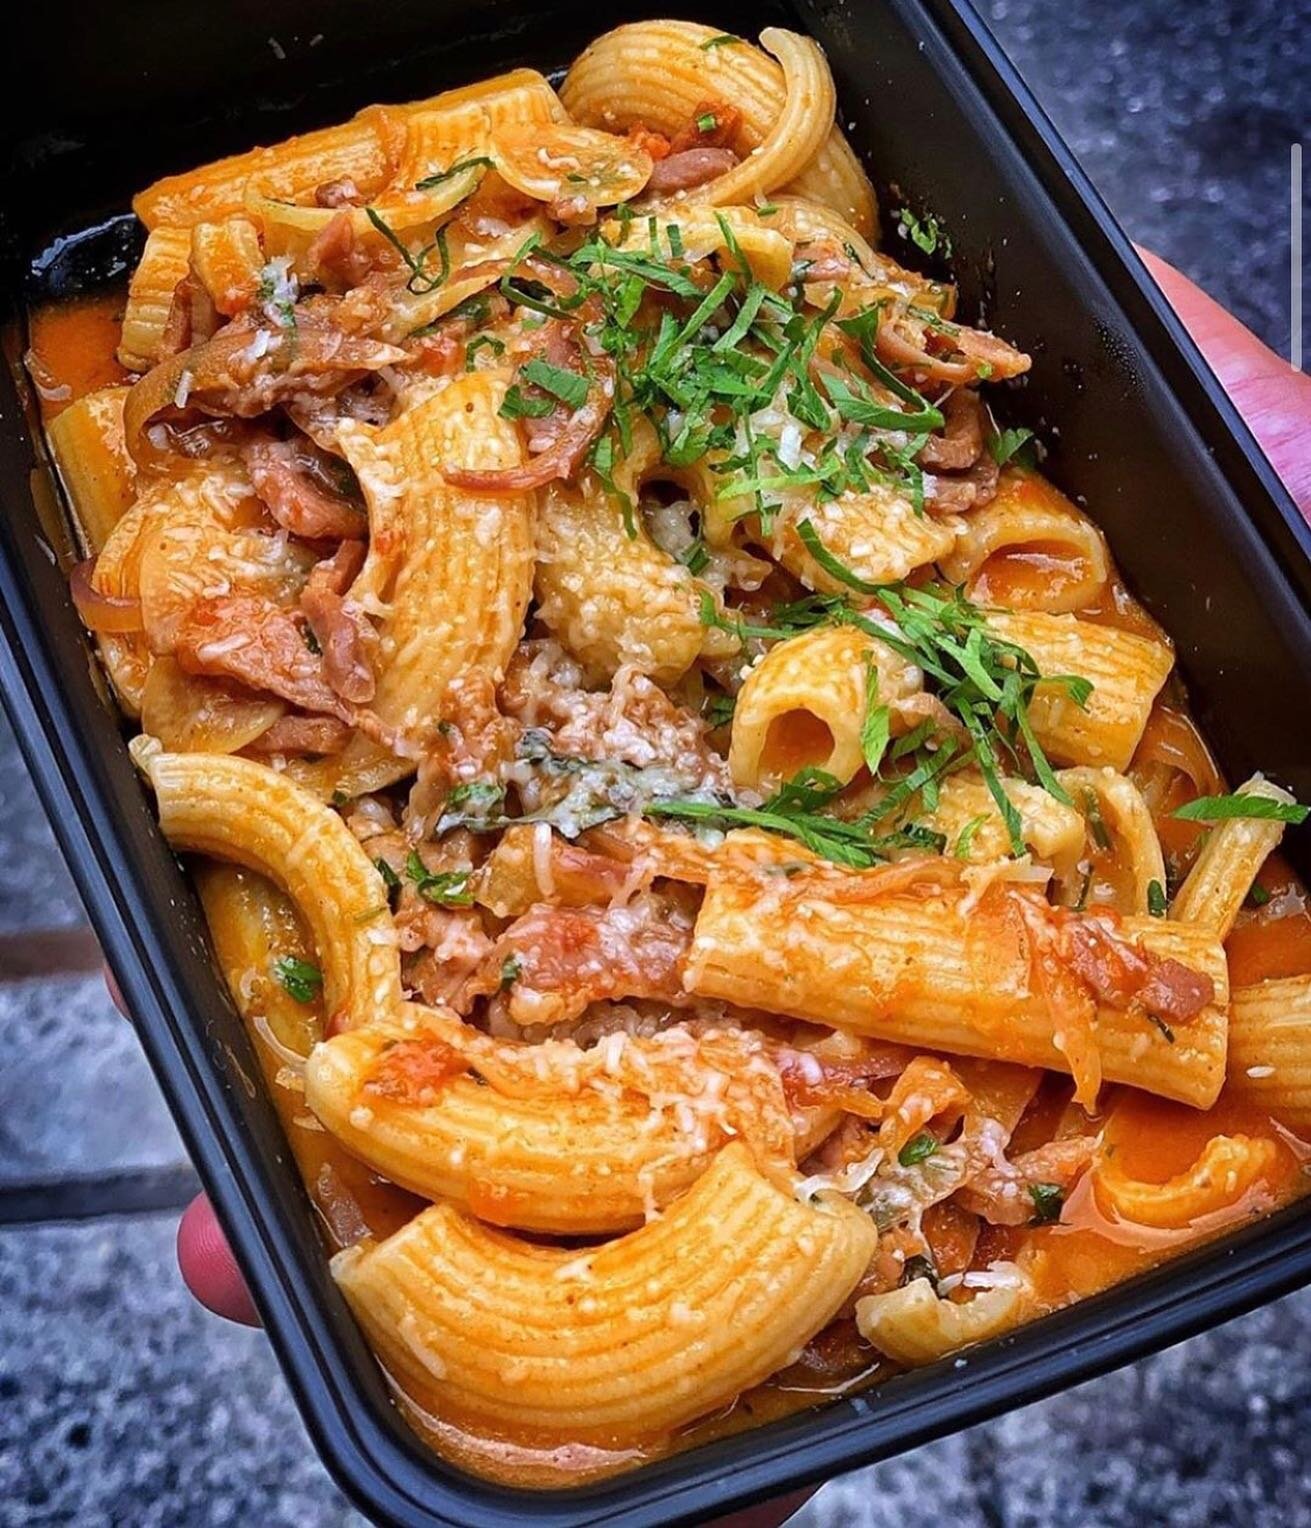 Love don&rsquo;t sauced a thing 🍝 Have you tried our Rigatoni all'Antico?
&bull;
Featuring: Antico Noè's Spicy Tomato Sauce, Prosciutto Crudo, Red Onions, Garlic, White Wine, topped with Parmigiano Reggiano Cheese
&bull;
Order now for CURBSIDE PICK